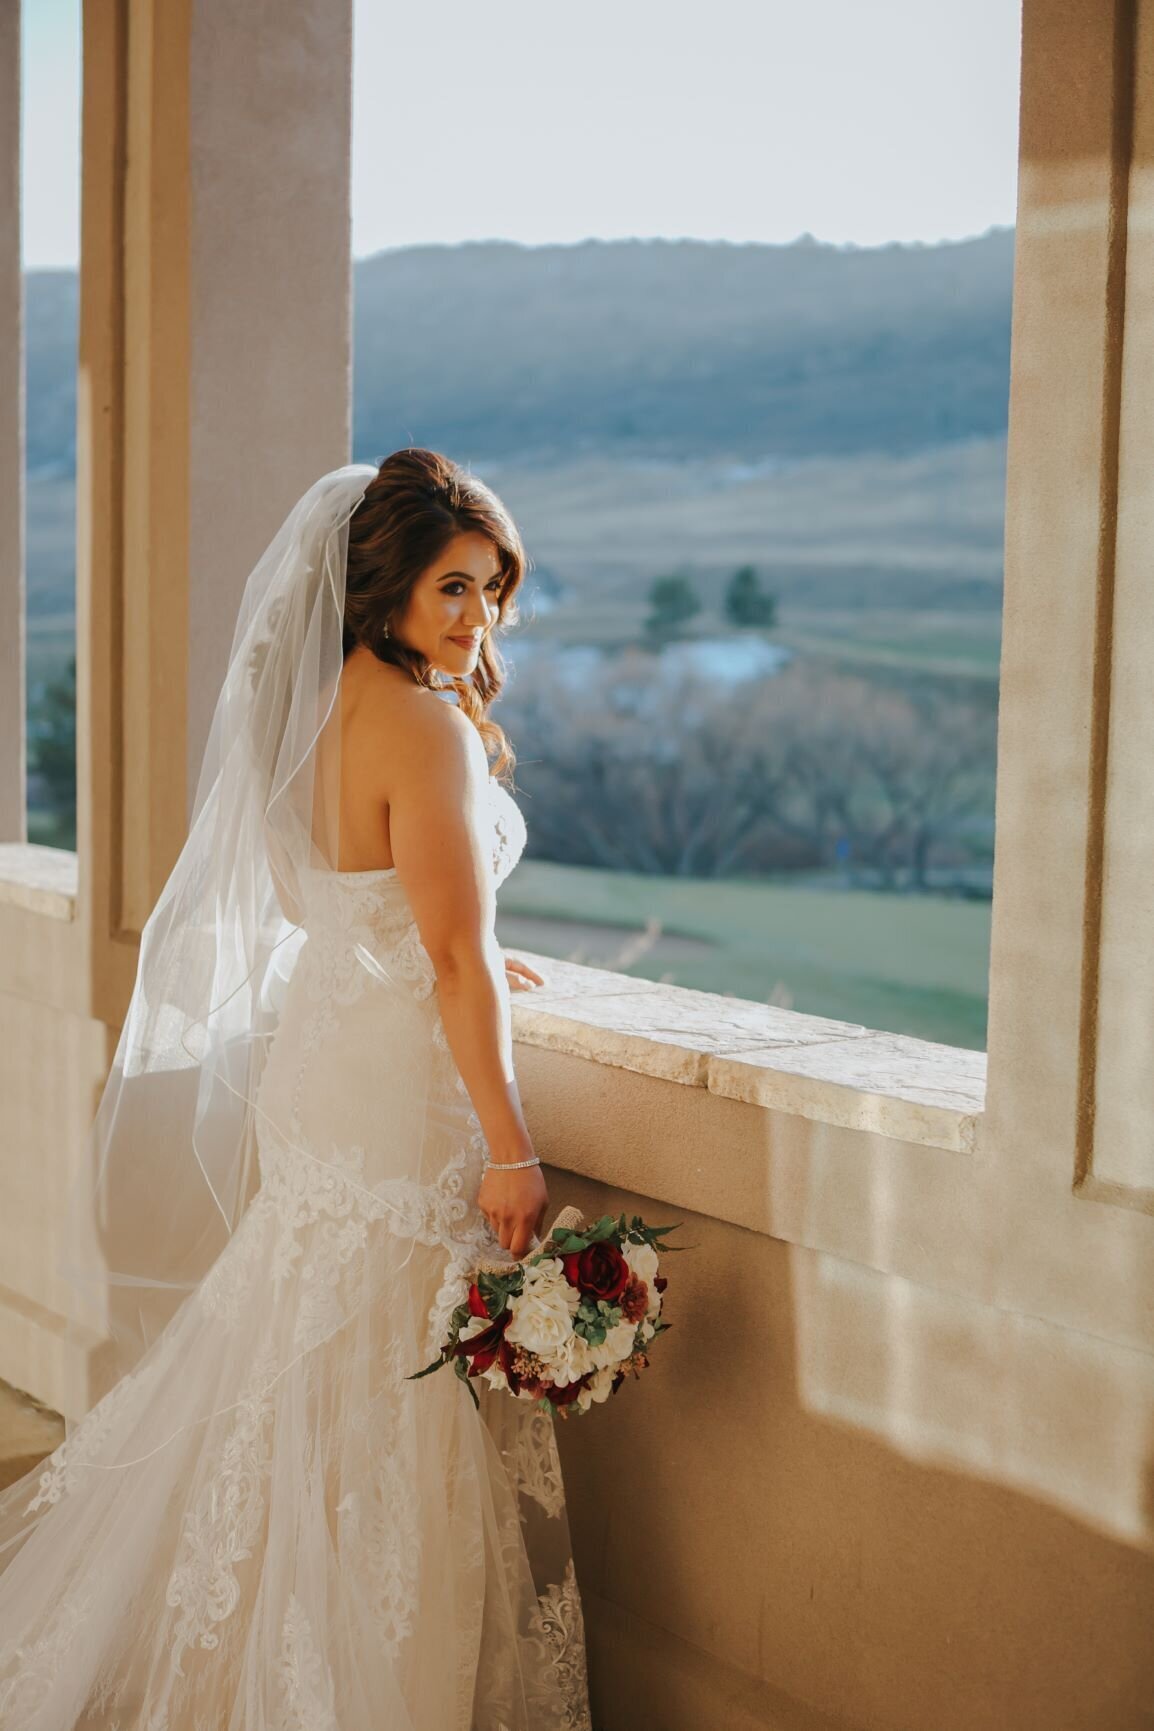 Bride-Looks-out-window